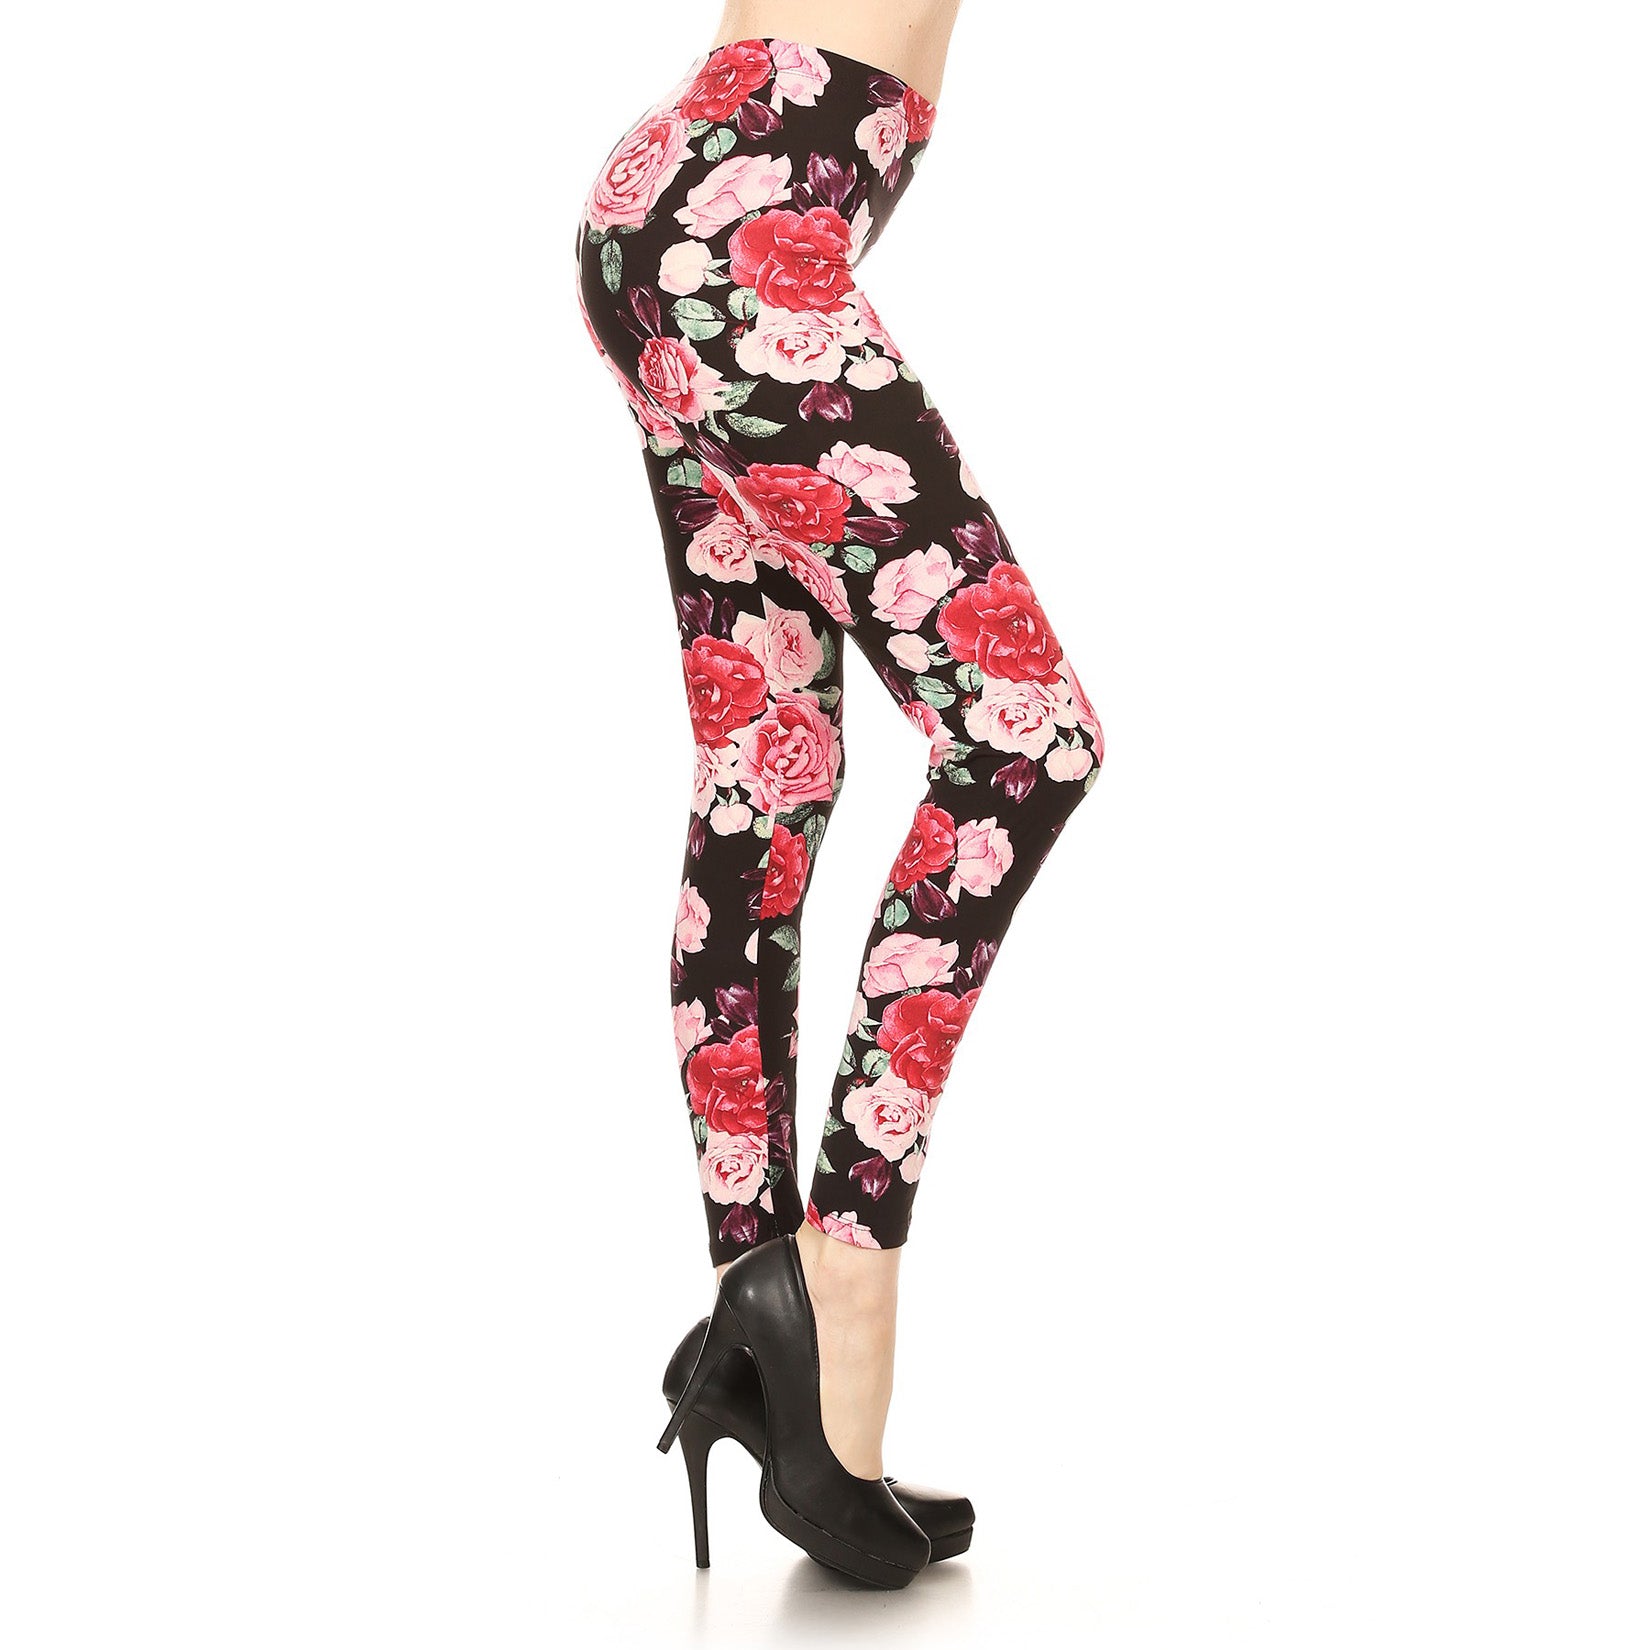 Discover our NEW floral collection leggings 💐 #evcr #newarrivals